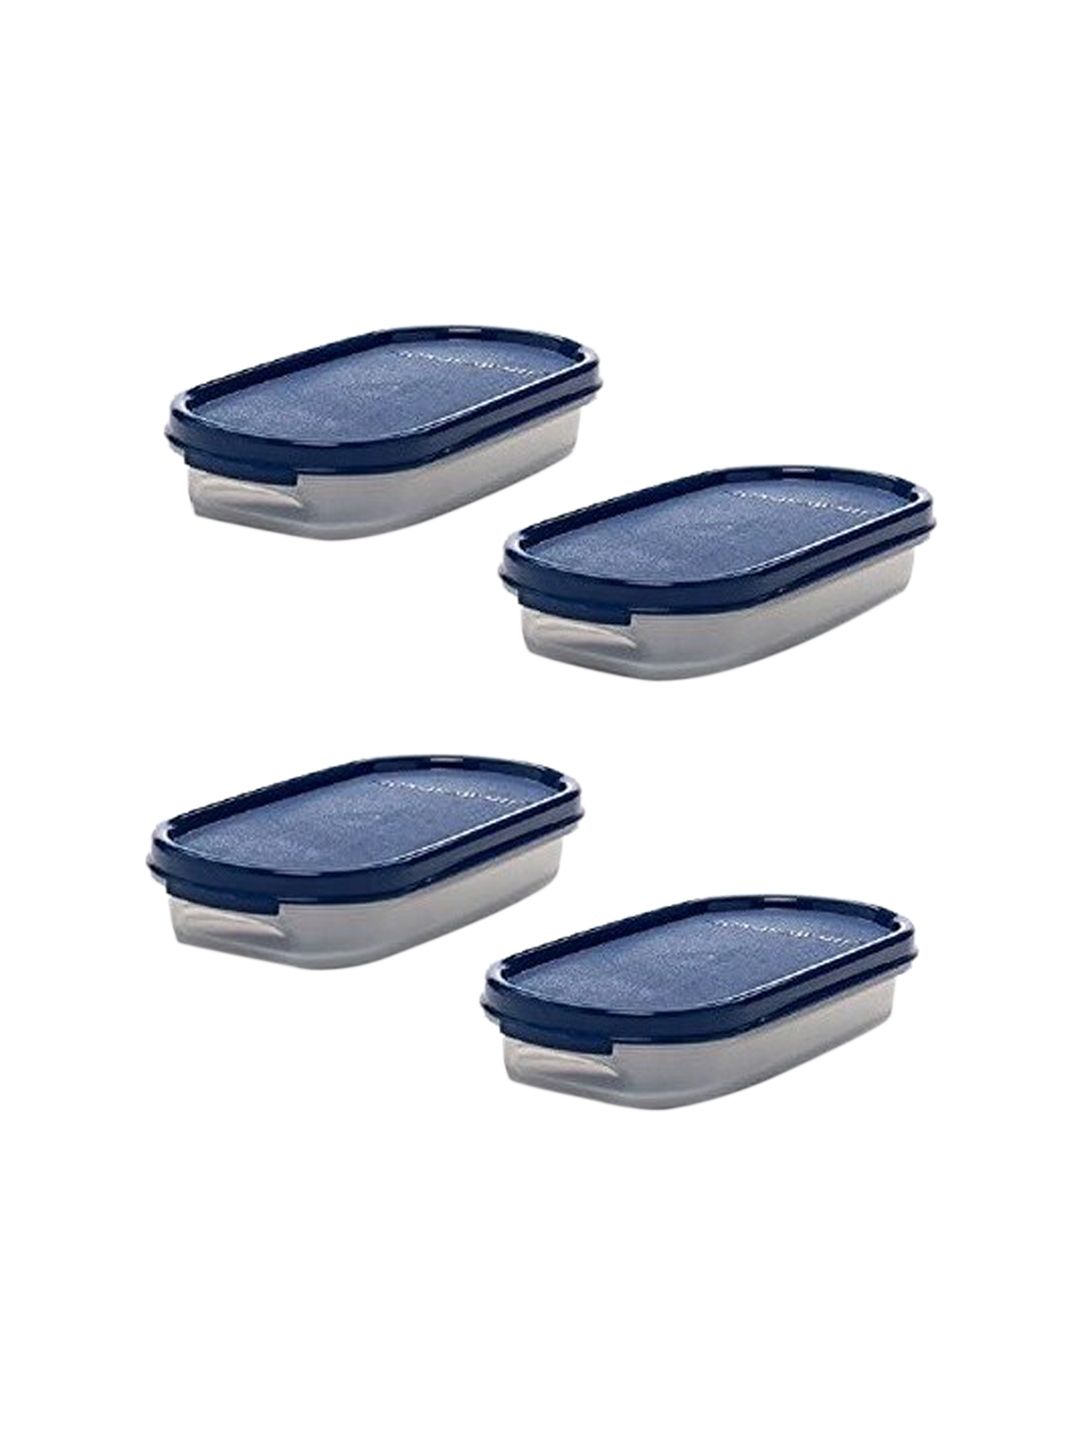 SignoraWare Set of 4 Blue & Transparent Solid  Oval Food Containers Price in India